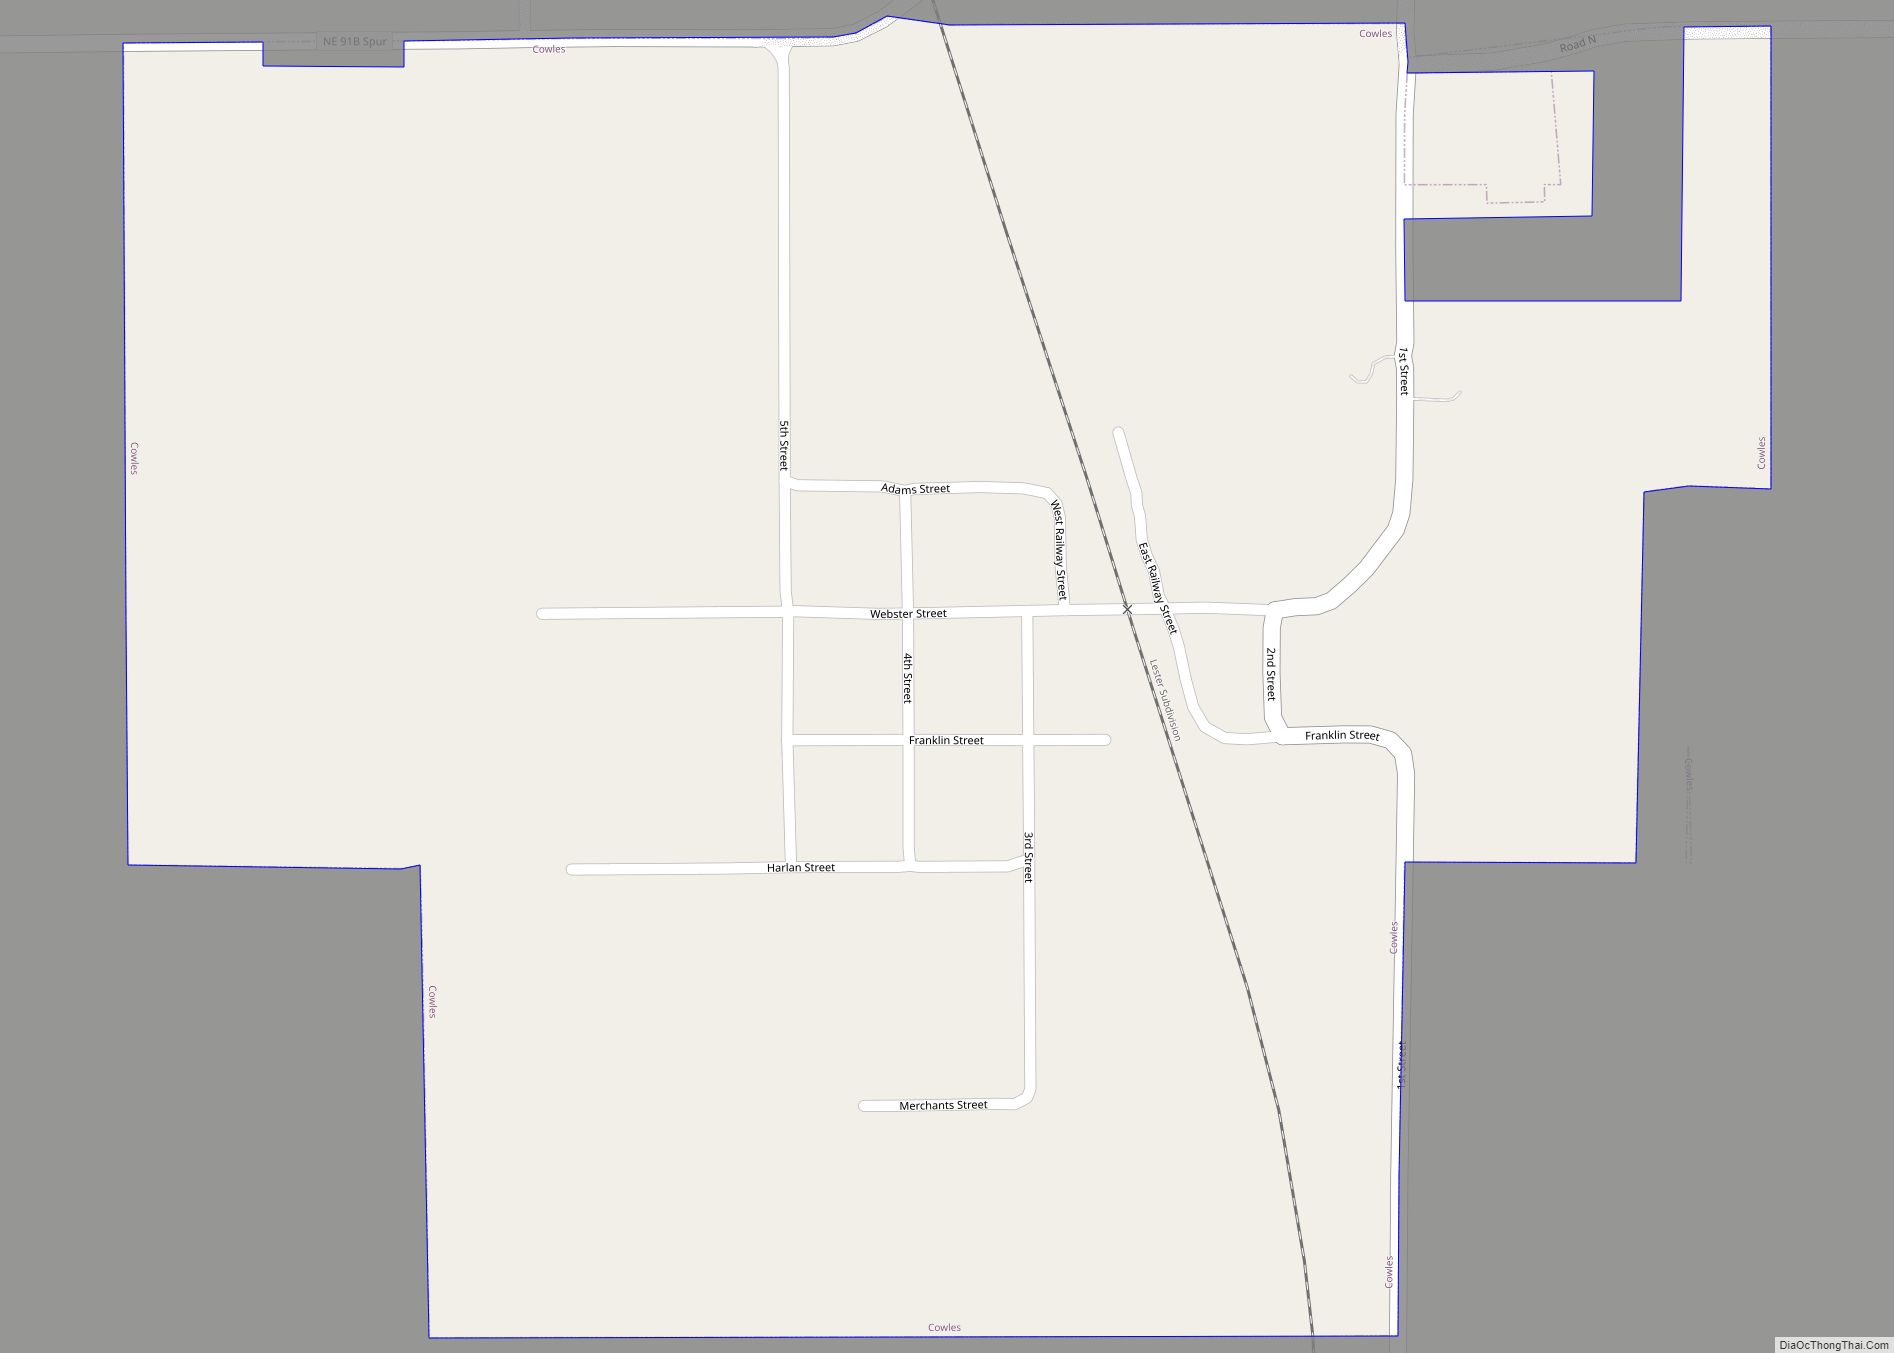 Map of Cowles village